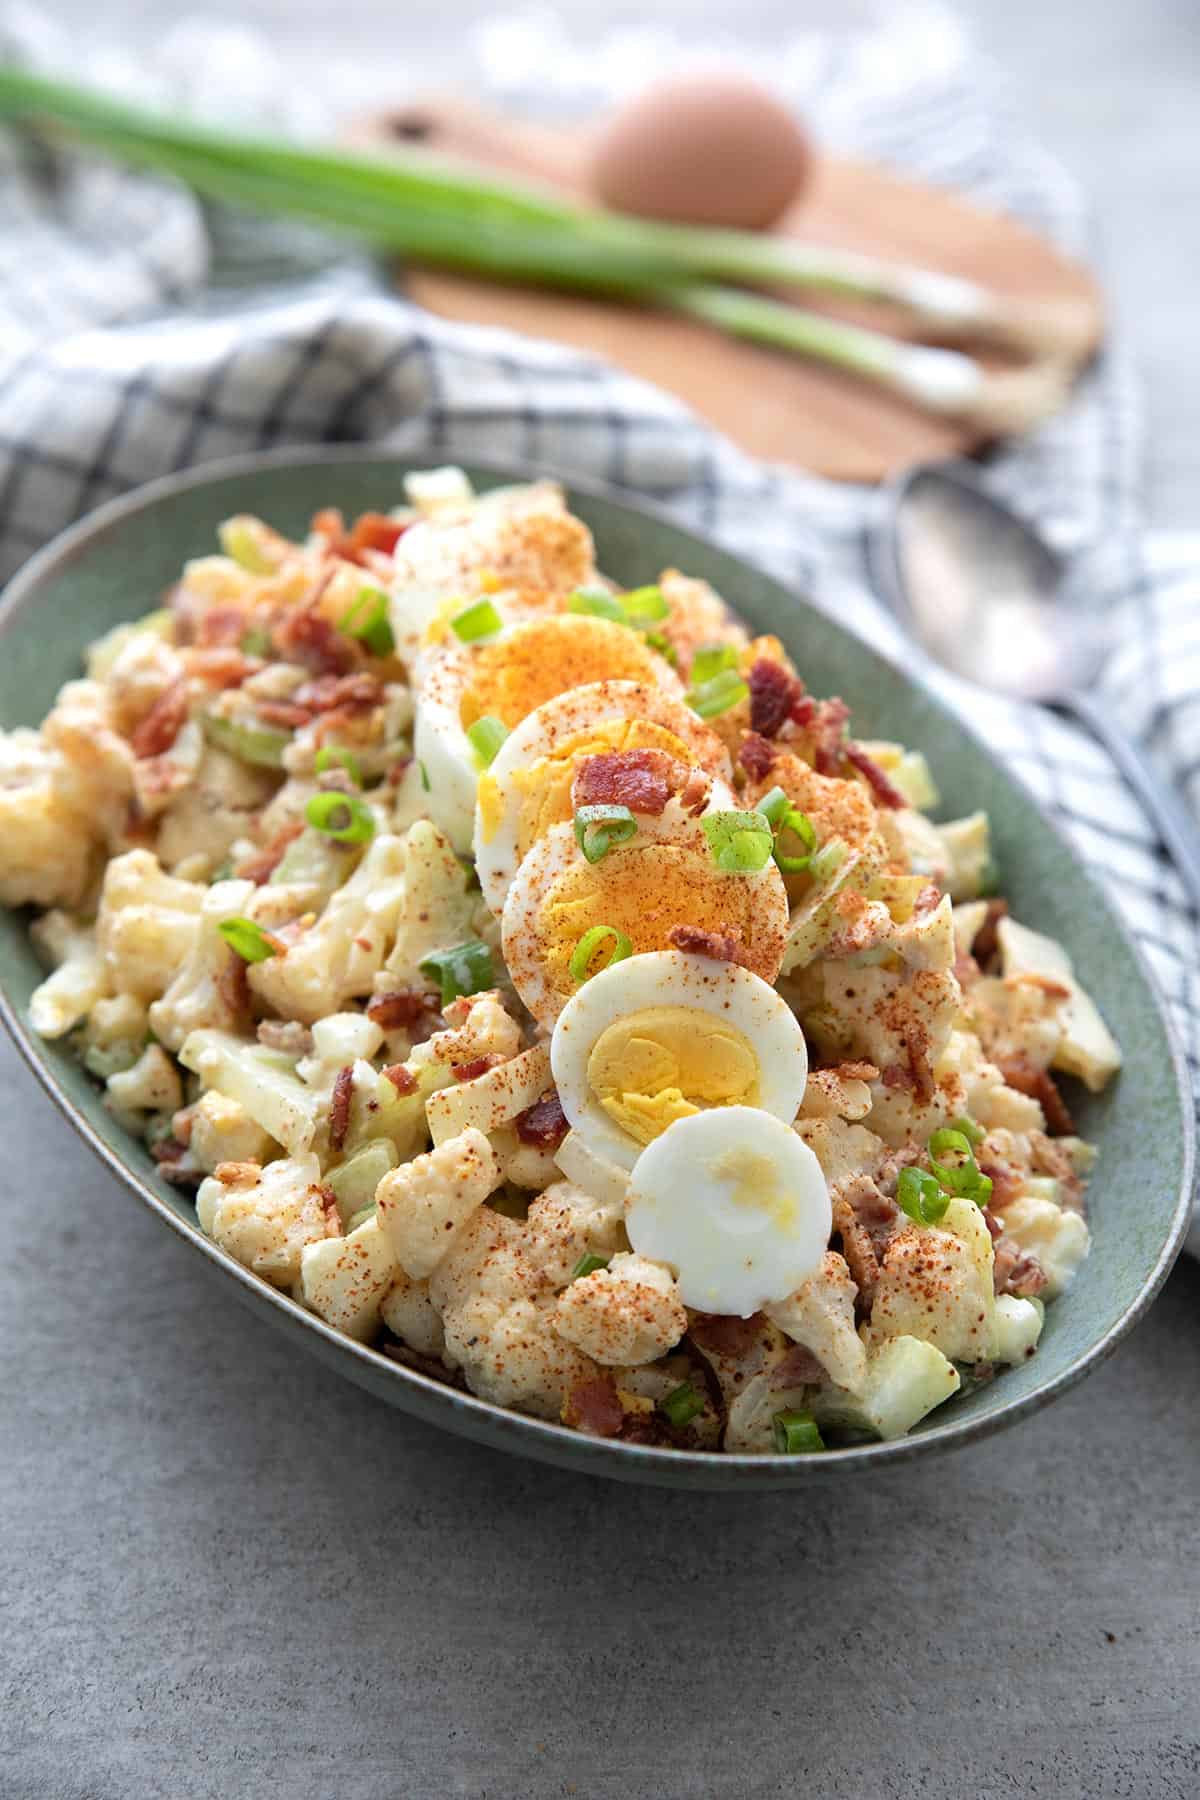 Cauliflower Potato Salad in a green oval serving dish with sliced hard boiled egg on top.